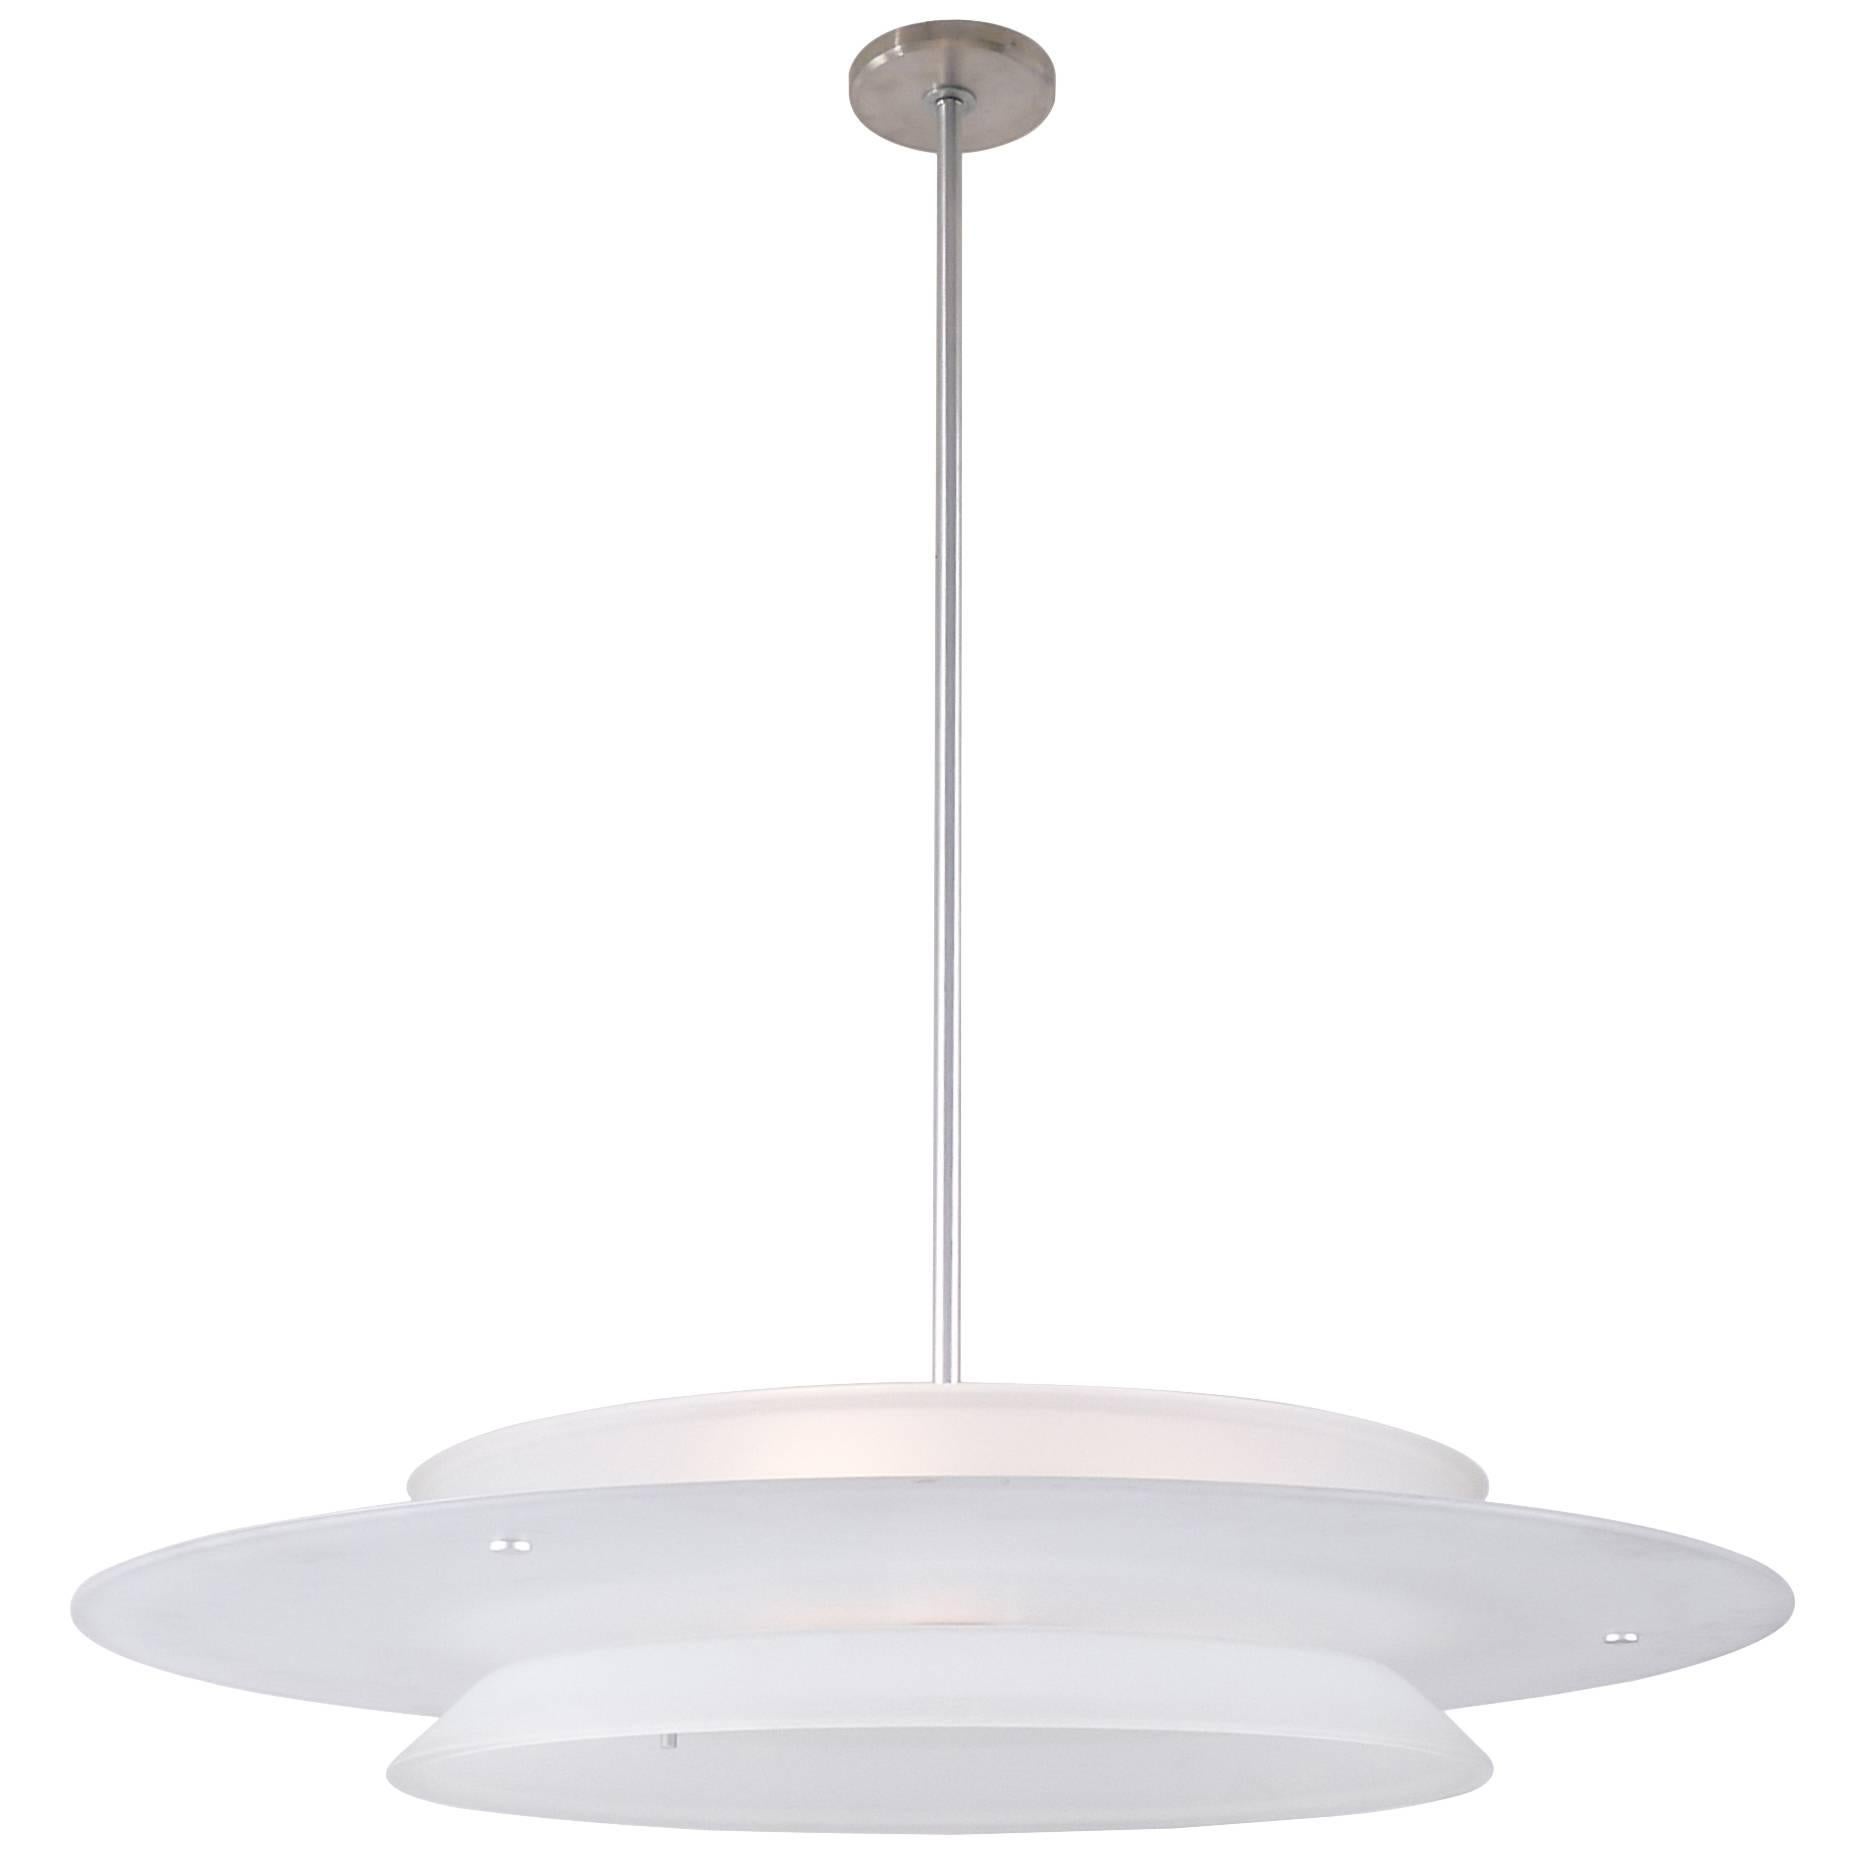 Duesenberg No. 038 36" Space Ship Pendant Light in Frosted Glass For Sale